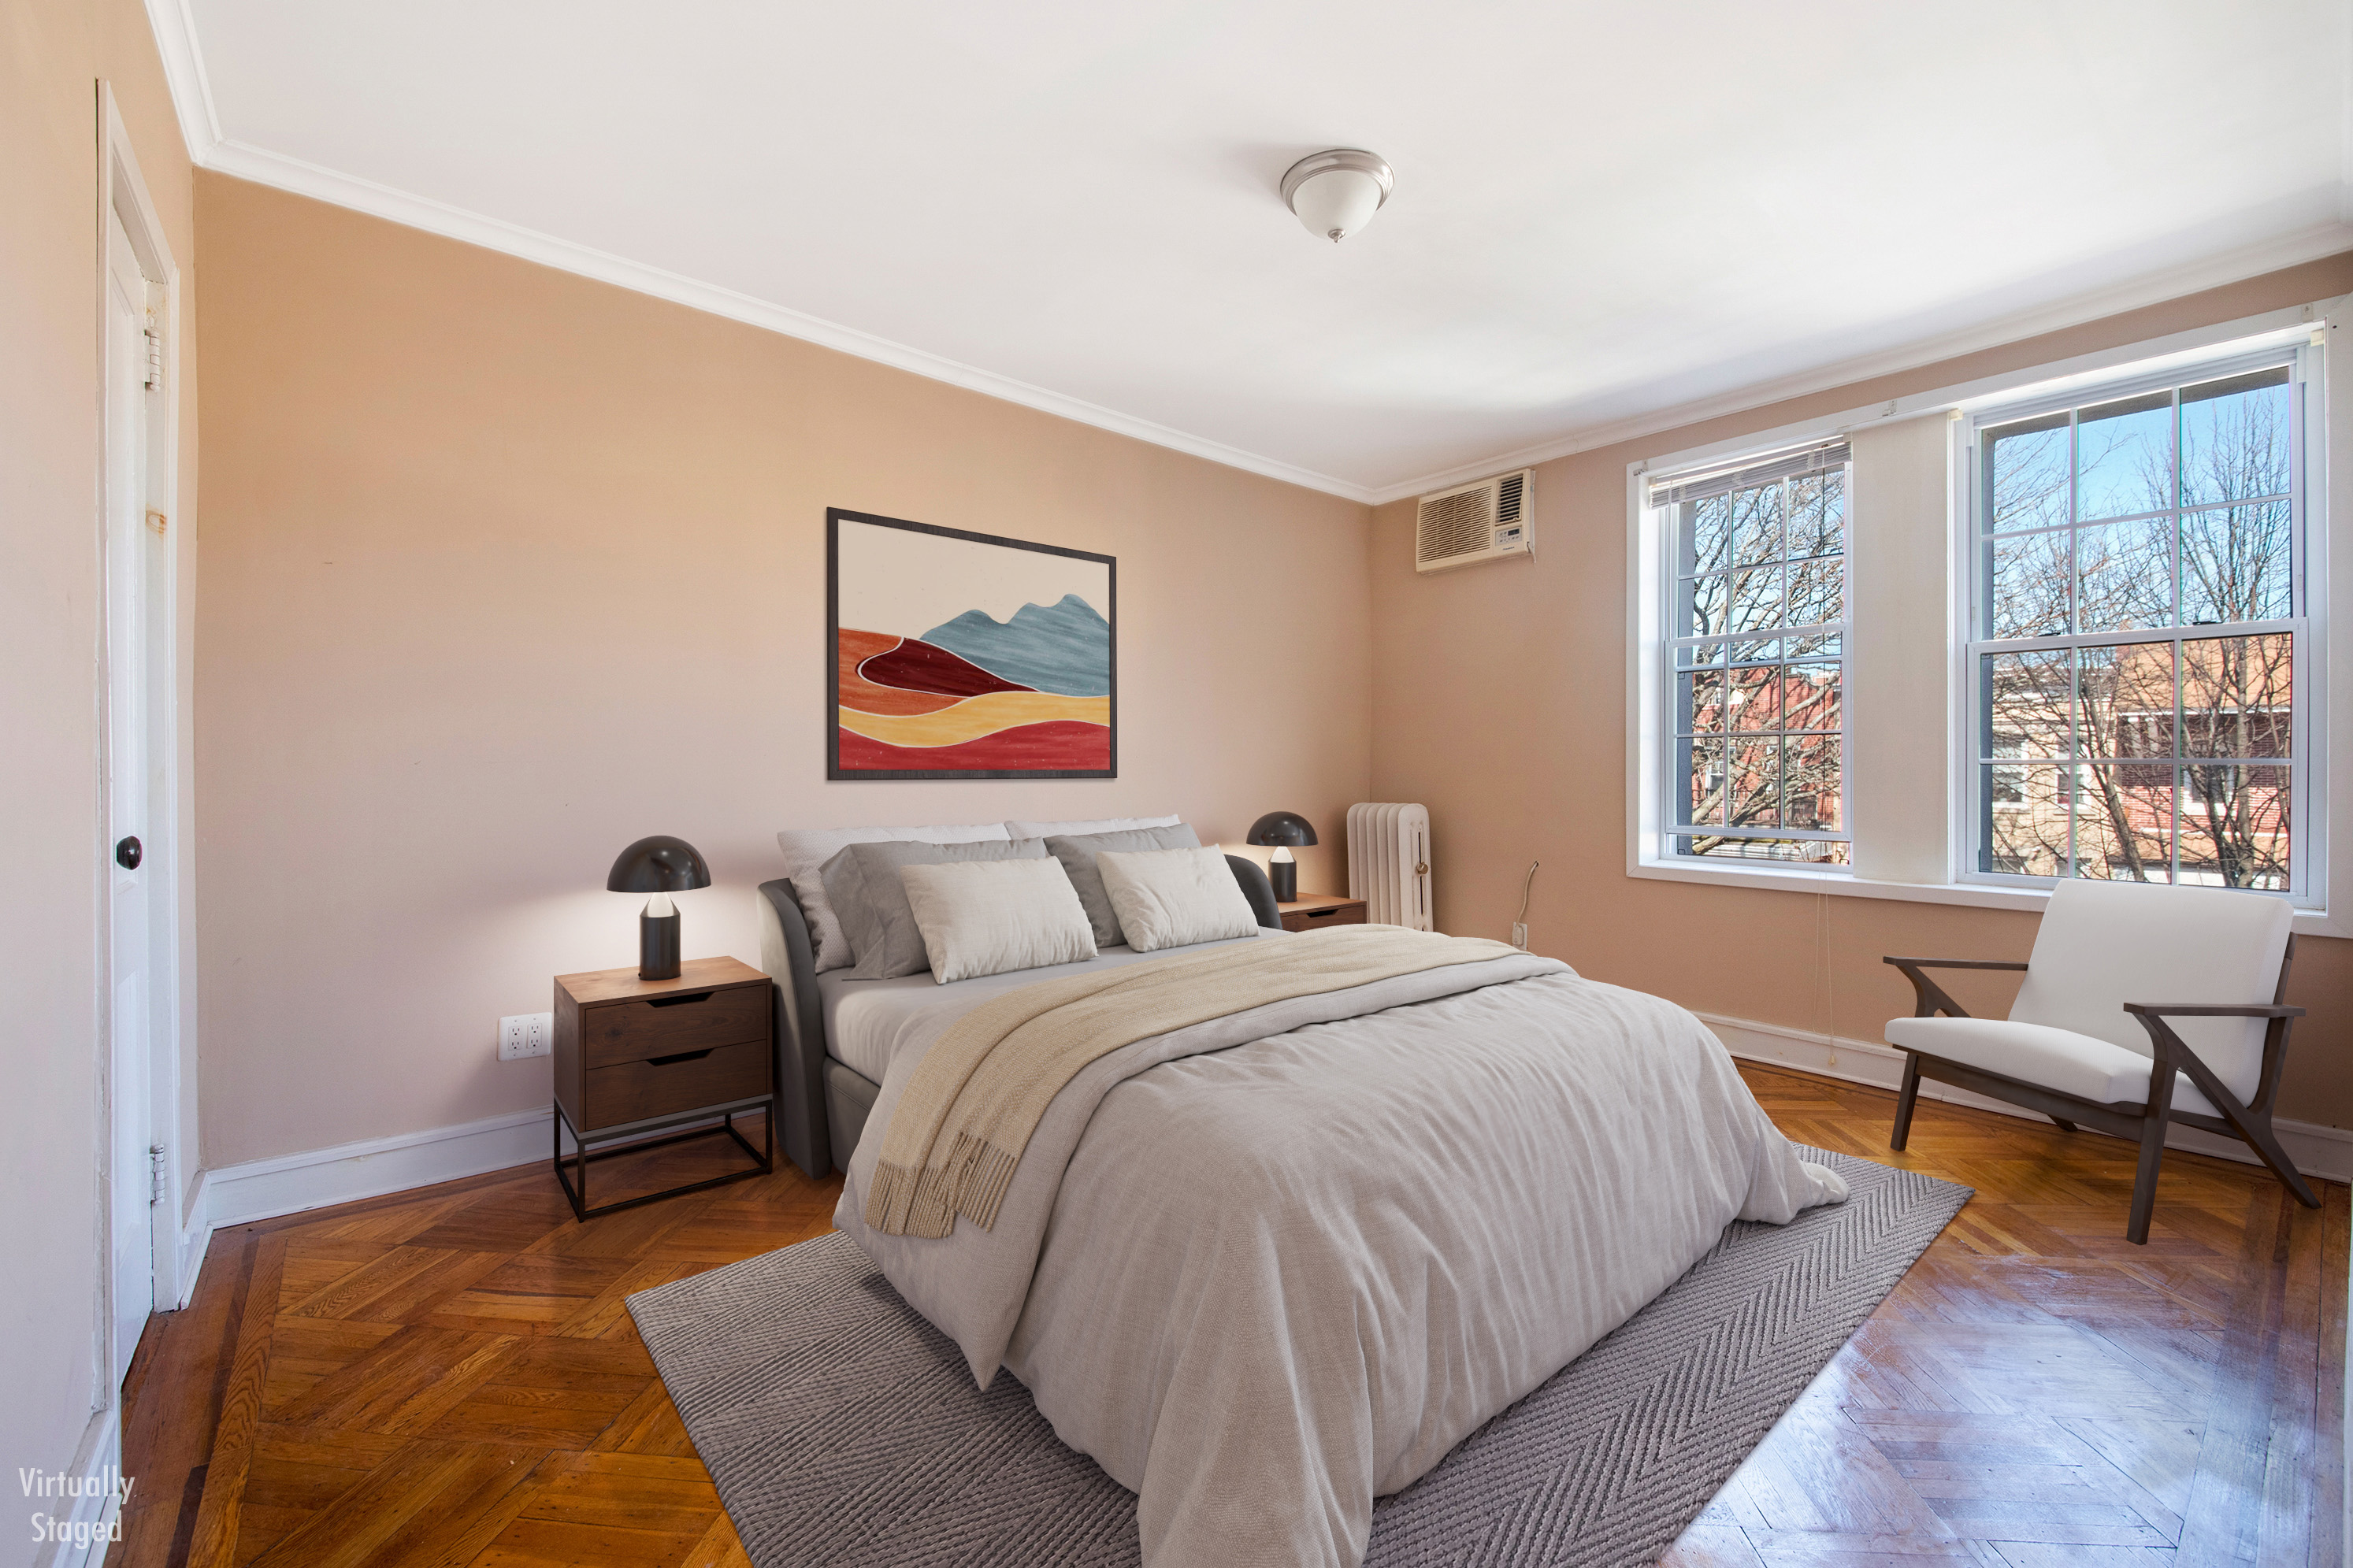 234 89th Street, Brooklyn, New York, 11209, United States, 3 Bedrooms Bedrooms, ,2 BathroomsBathrooms,Residential,For Sale,234 89th Street,1510724